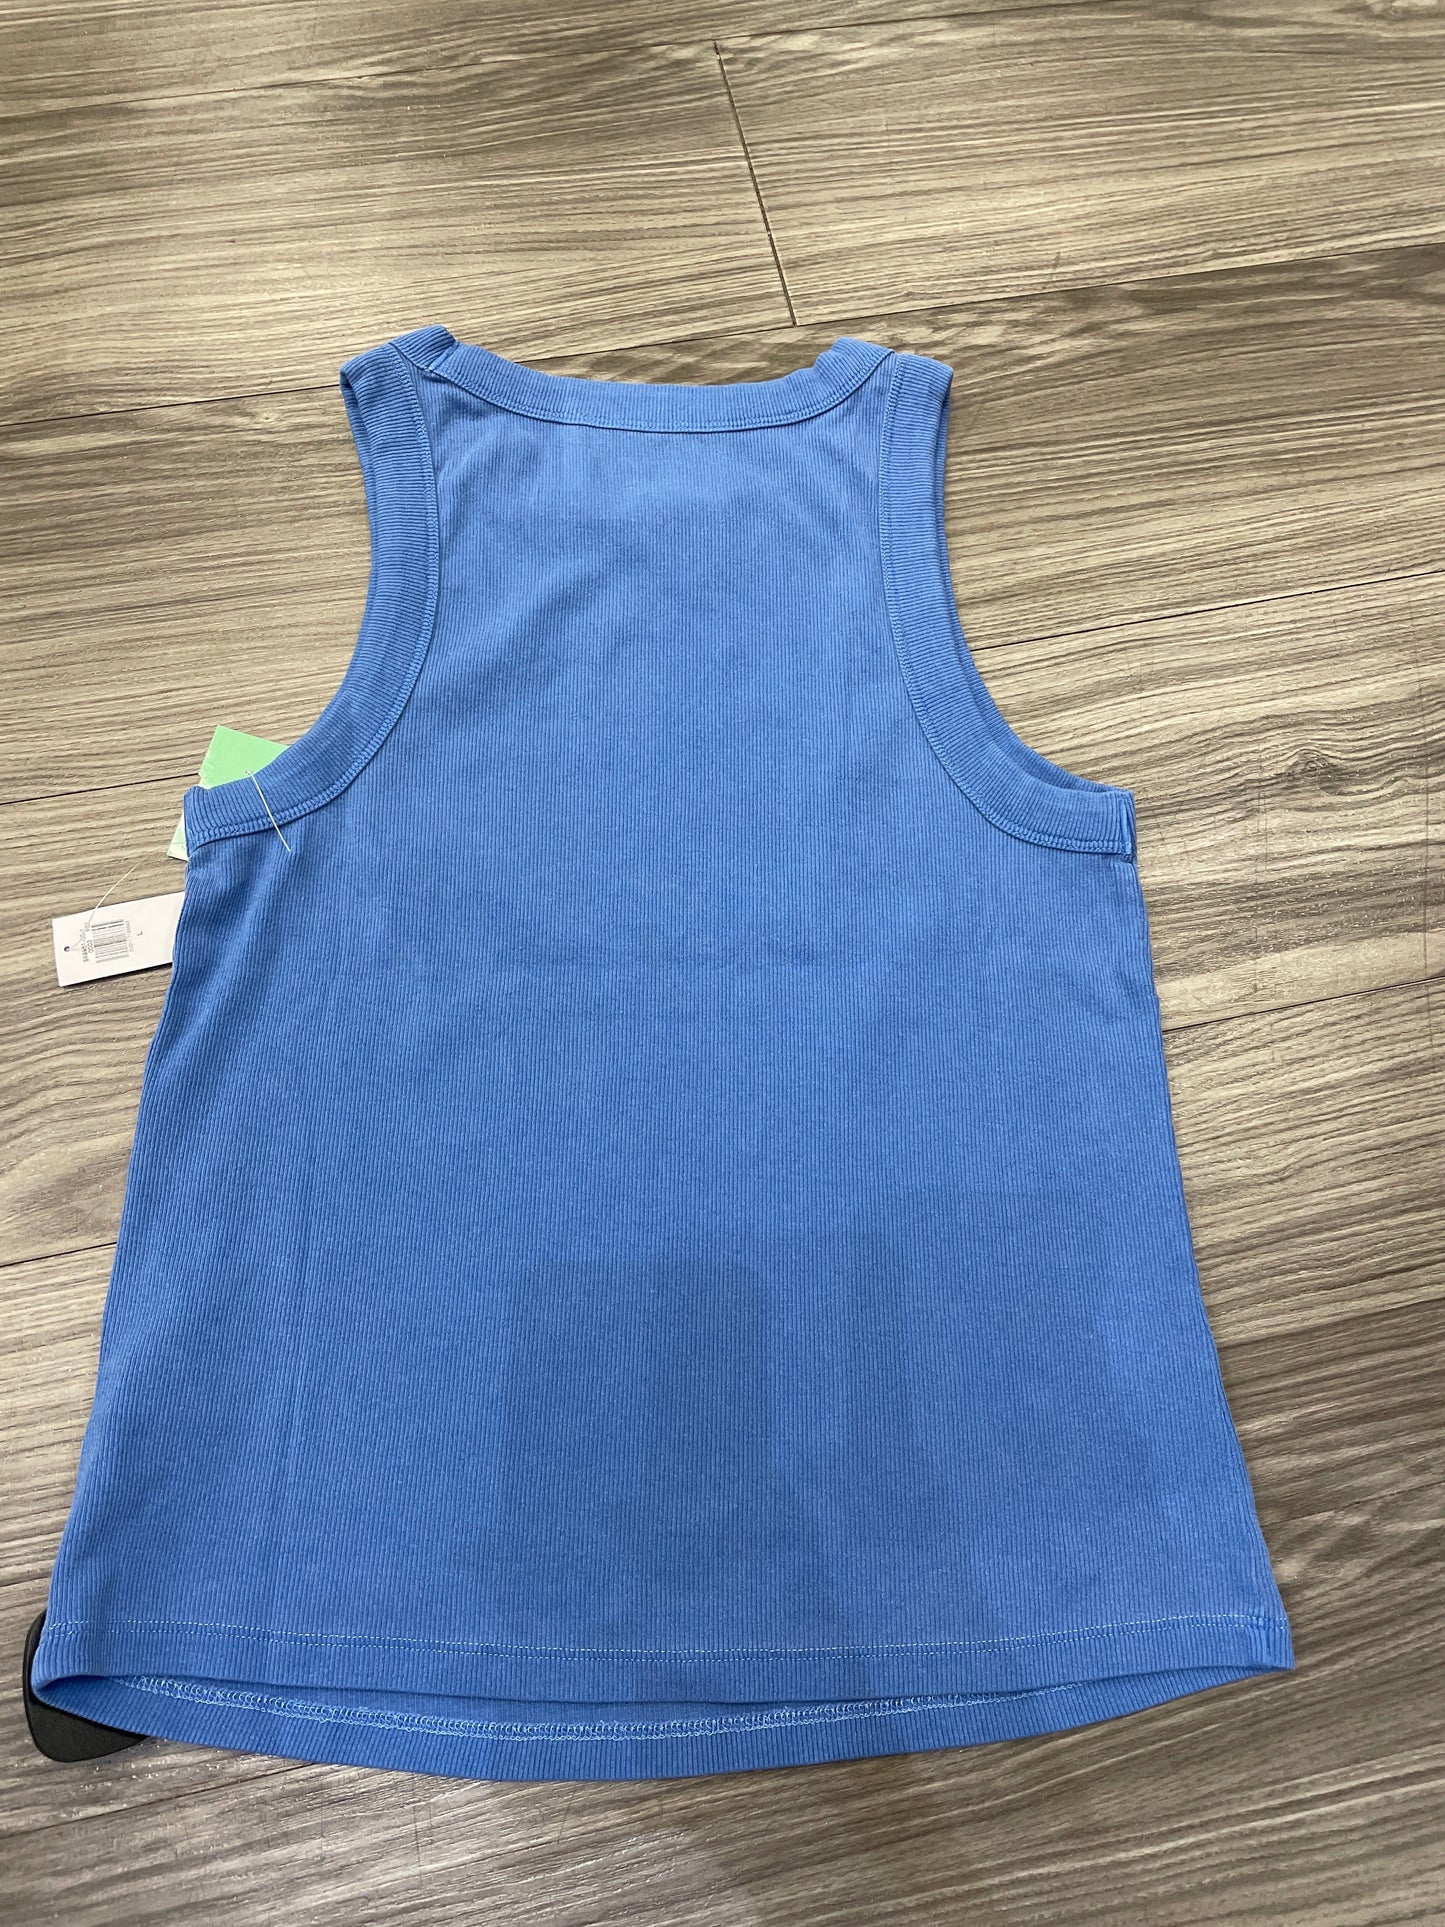 Blue Tank Top Old Navy, Size L